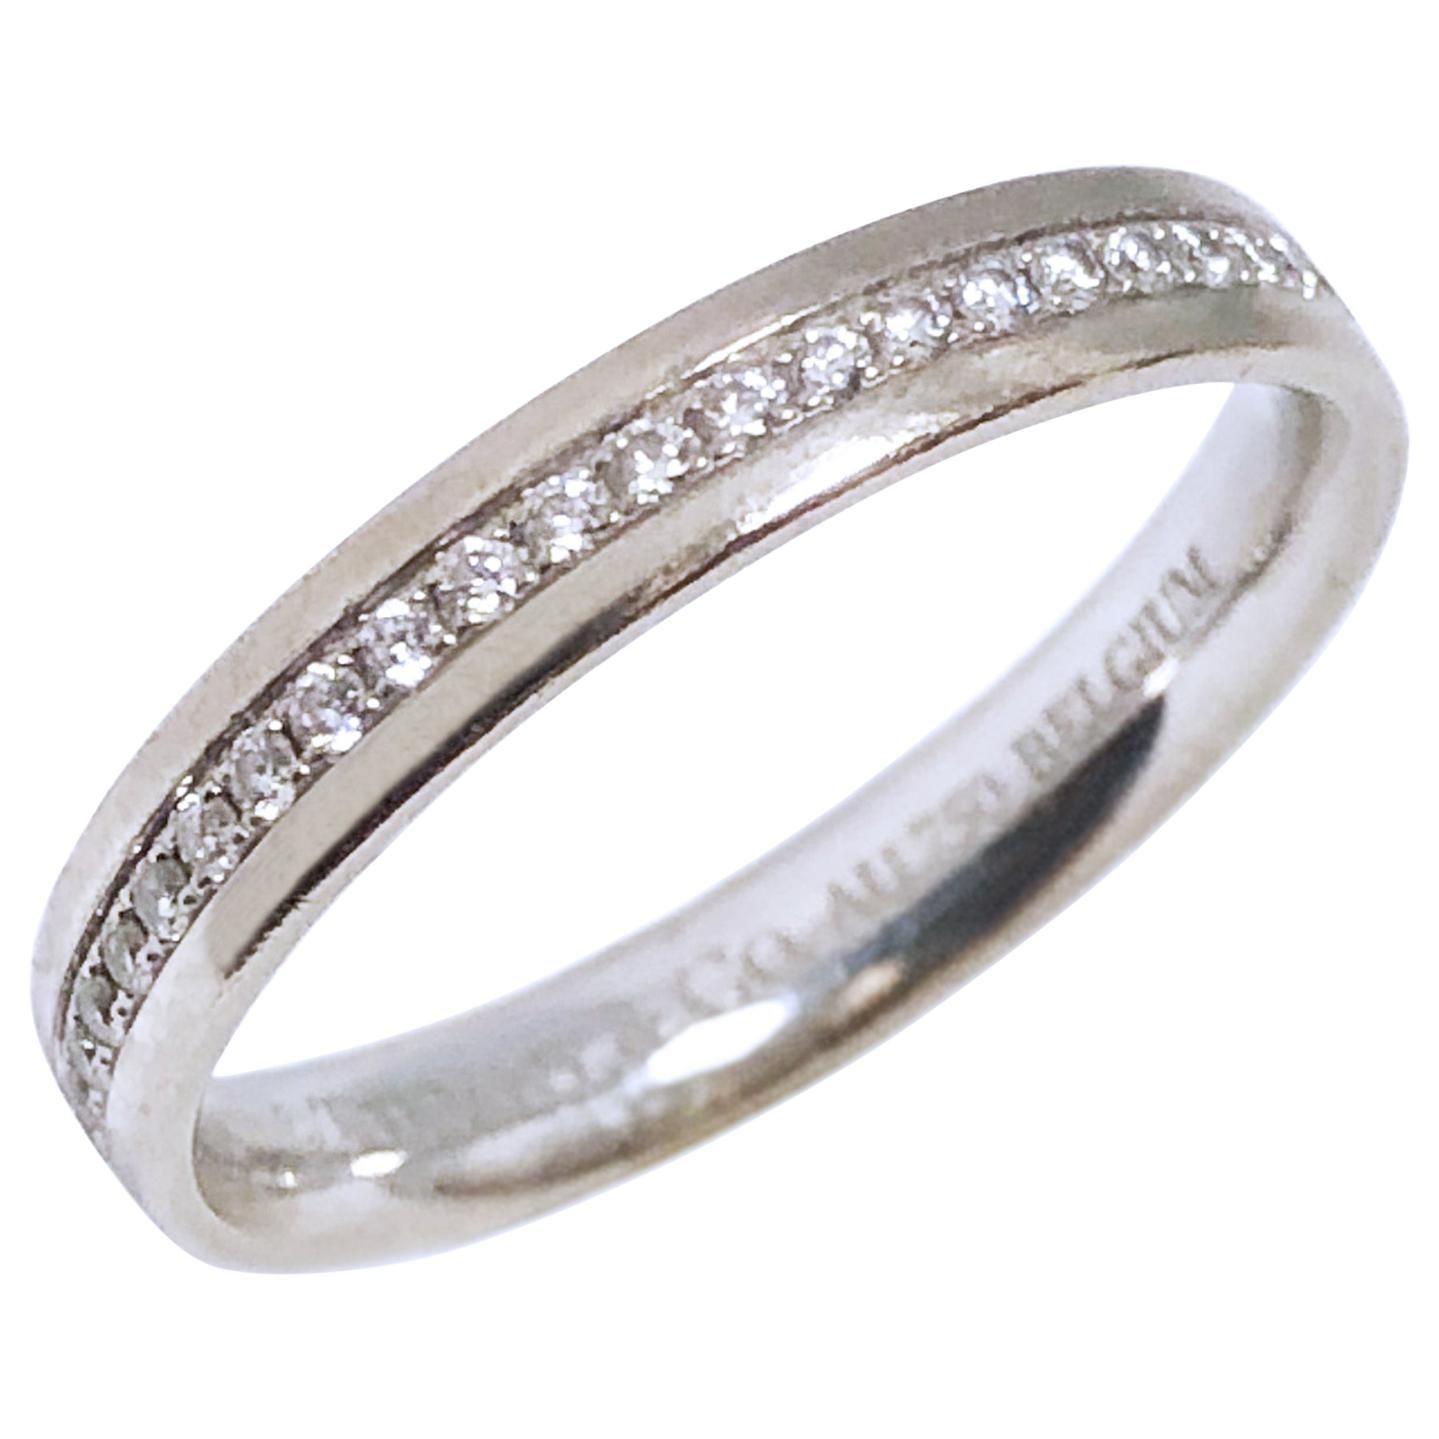 Tiffany & Co. White Gold and Diamond Eternity Band Ring